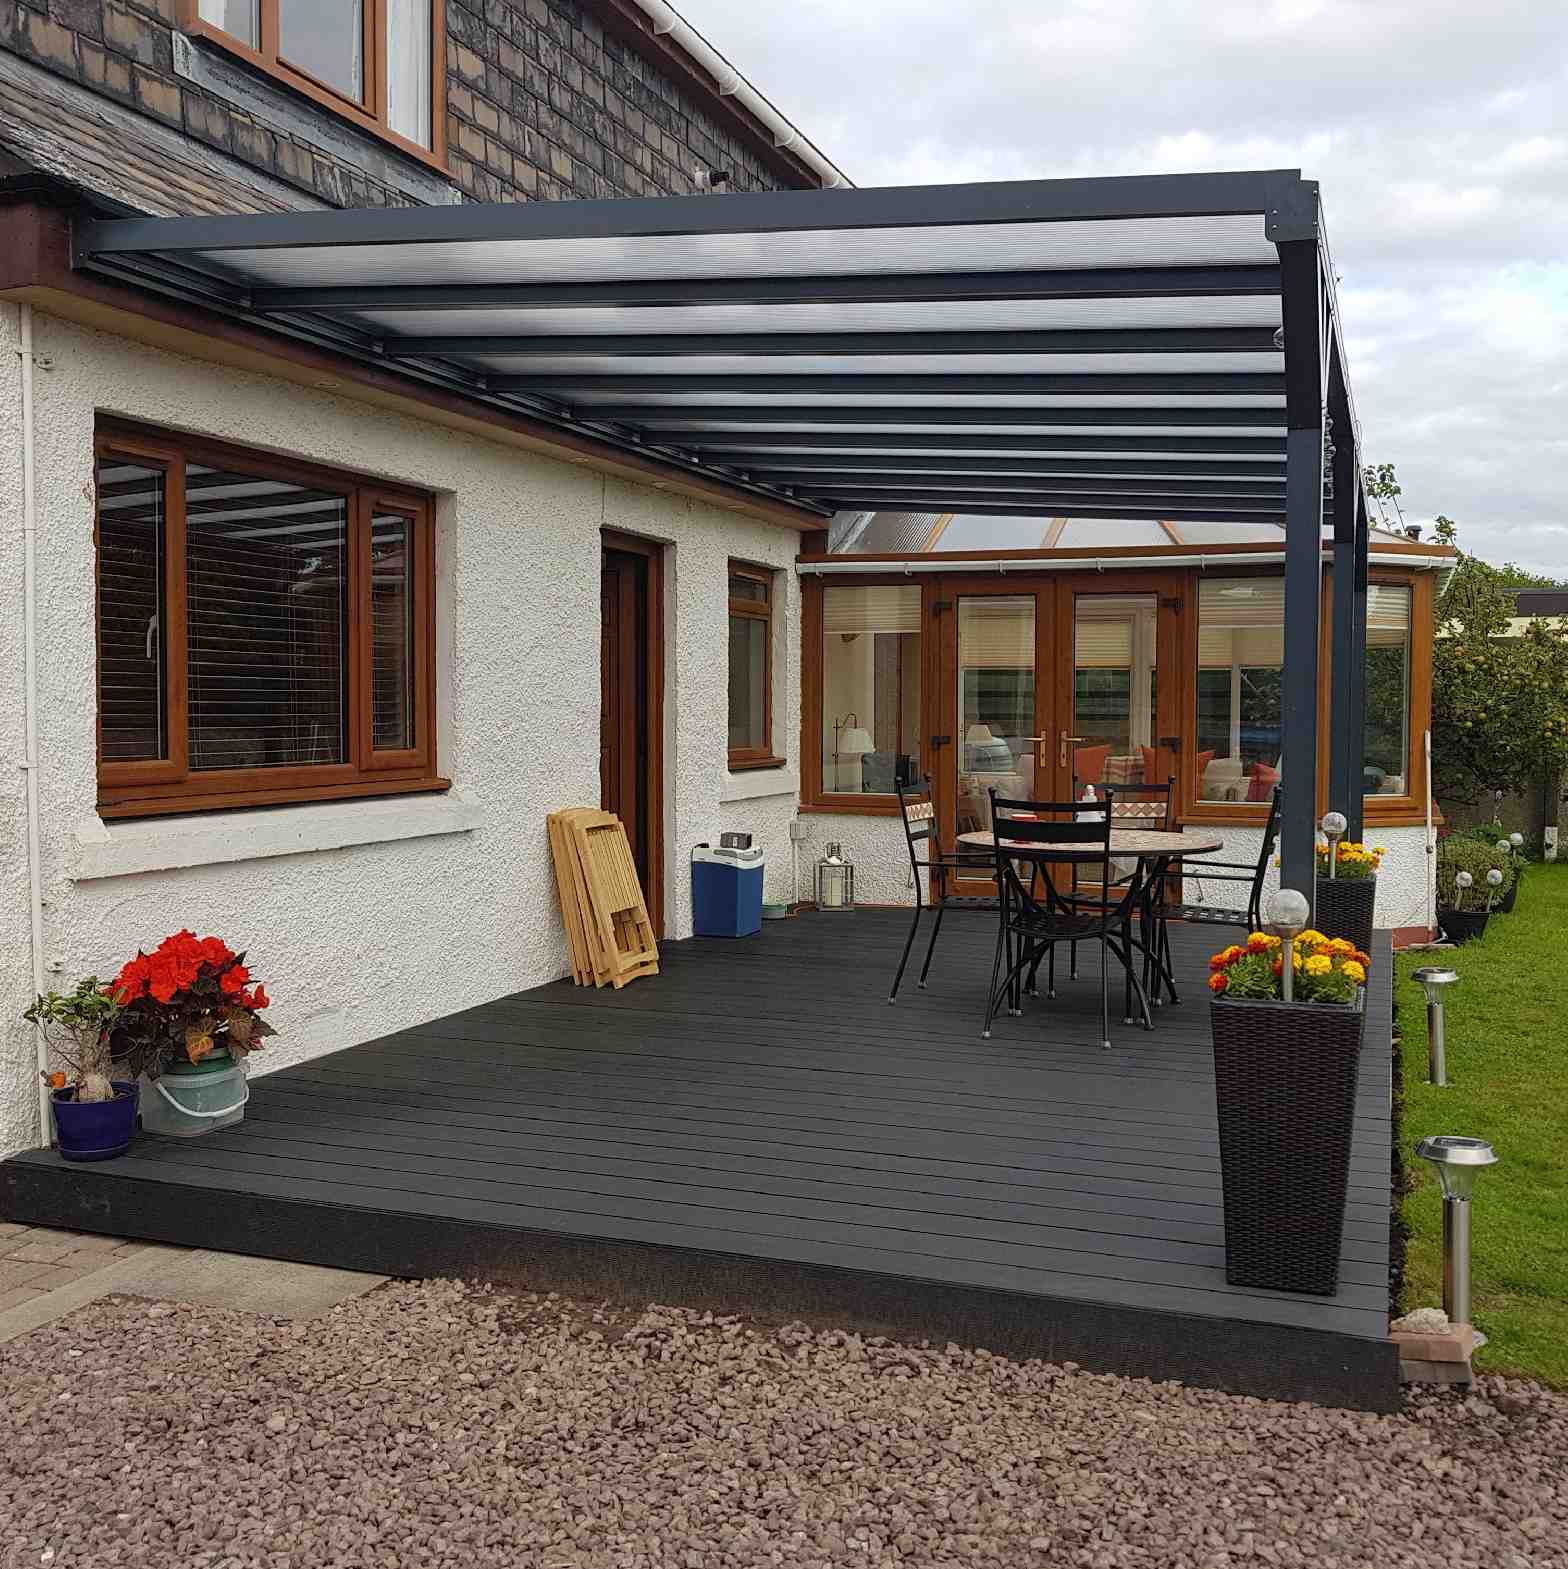 Buy Omega Verandah, Anthracite Grey, 16mm Polycarbonate Glazing - 6.3m (W) x 3.5m (P), (4) Supporting Posts online today